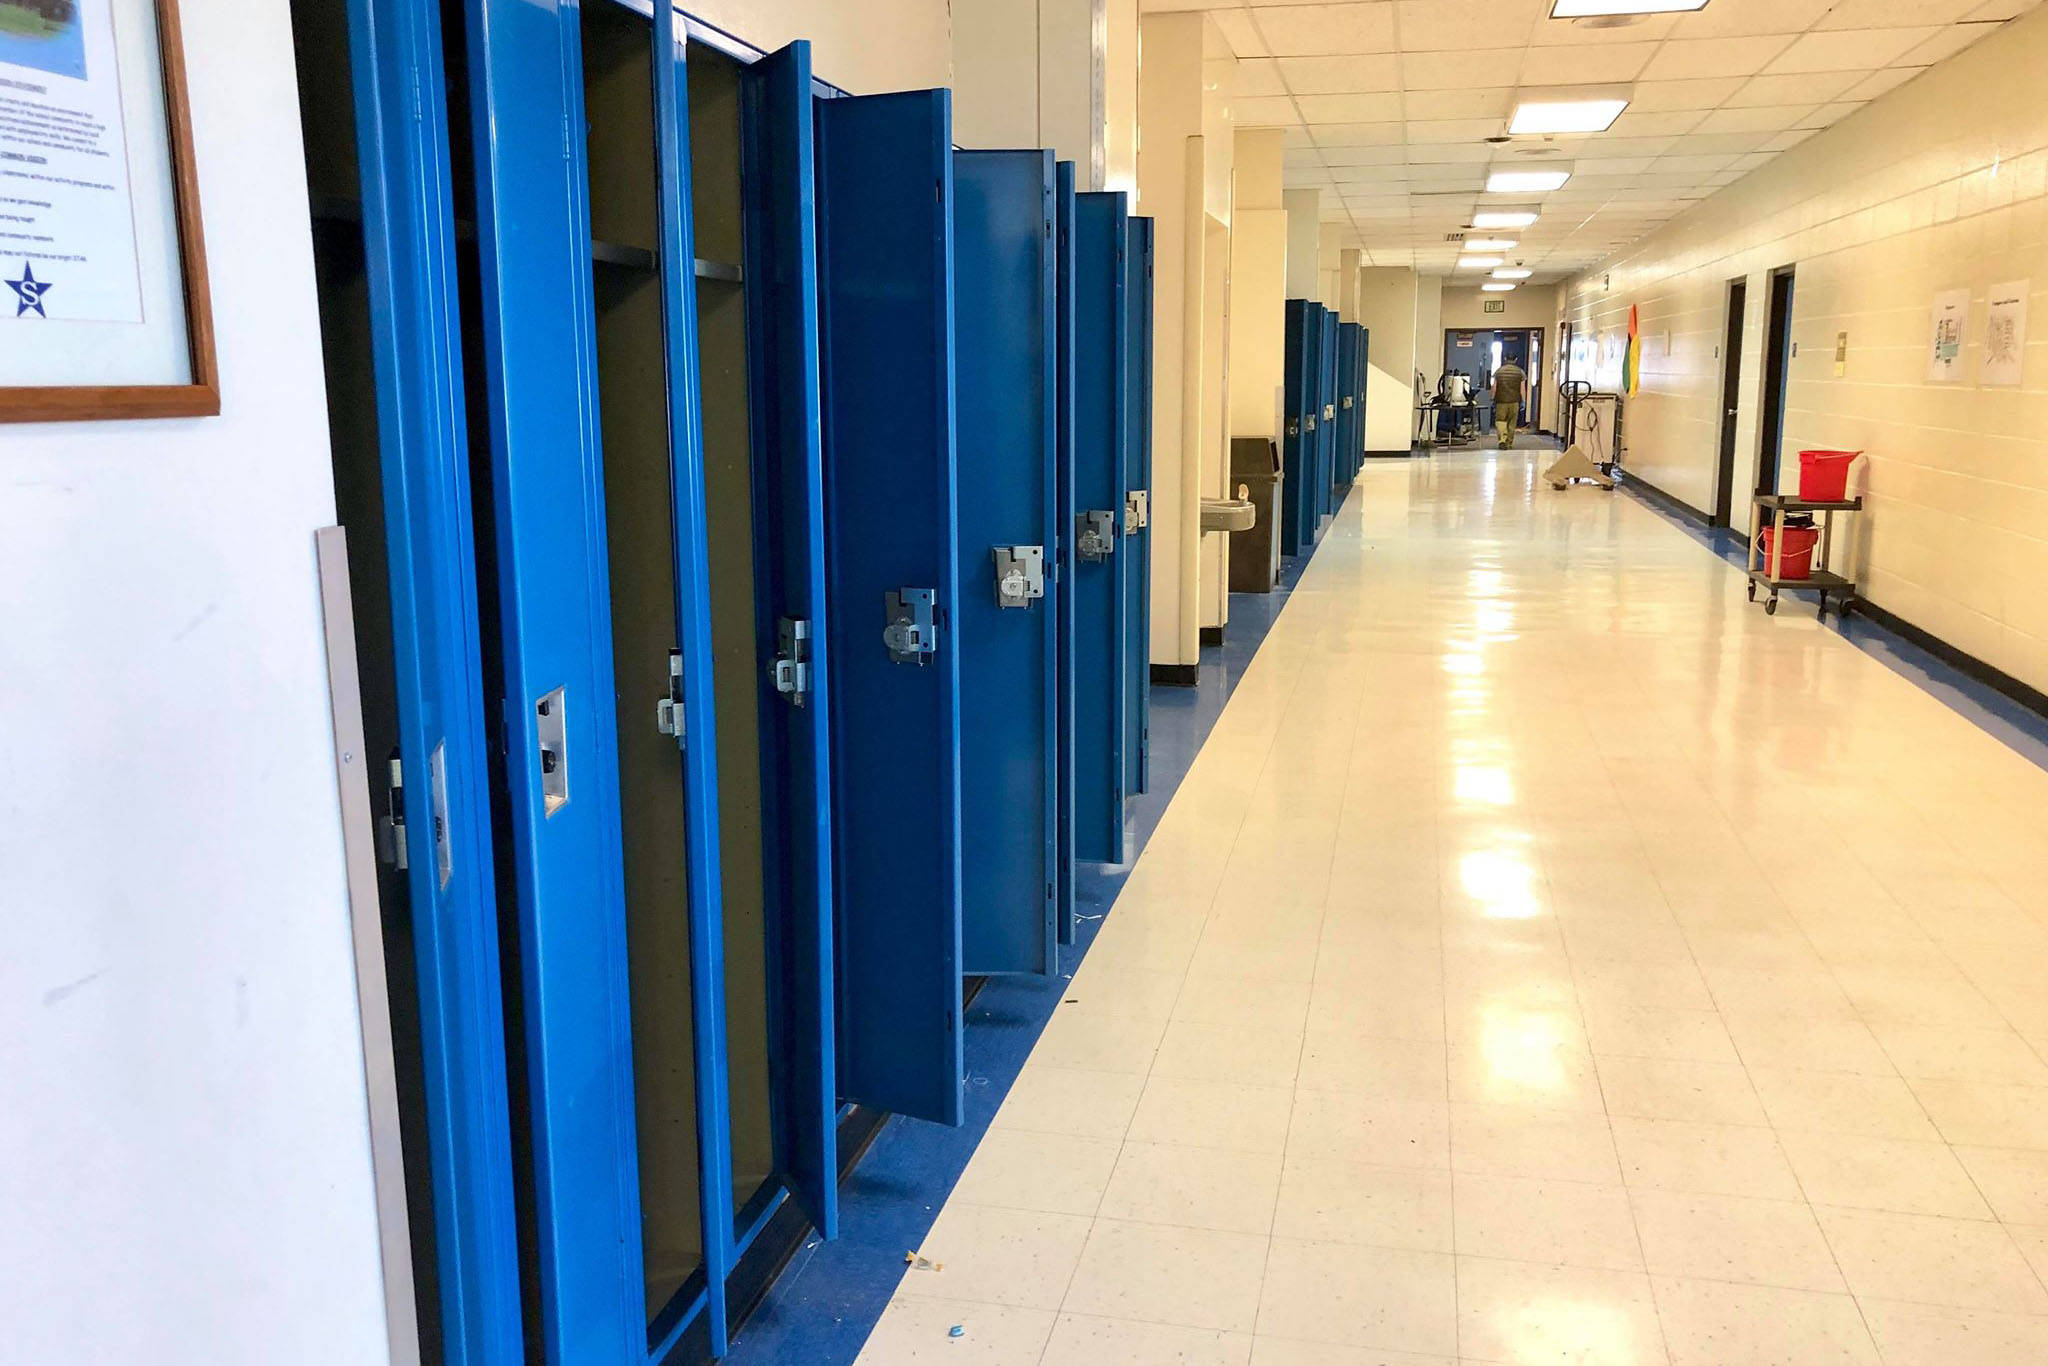 Empty lockers and hallways at Soldotna High School are photographed on Monday, April 6. (photo by Victoria Petersen/Peninsula Clarion)